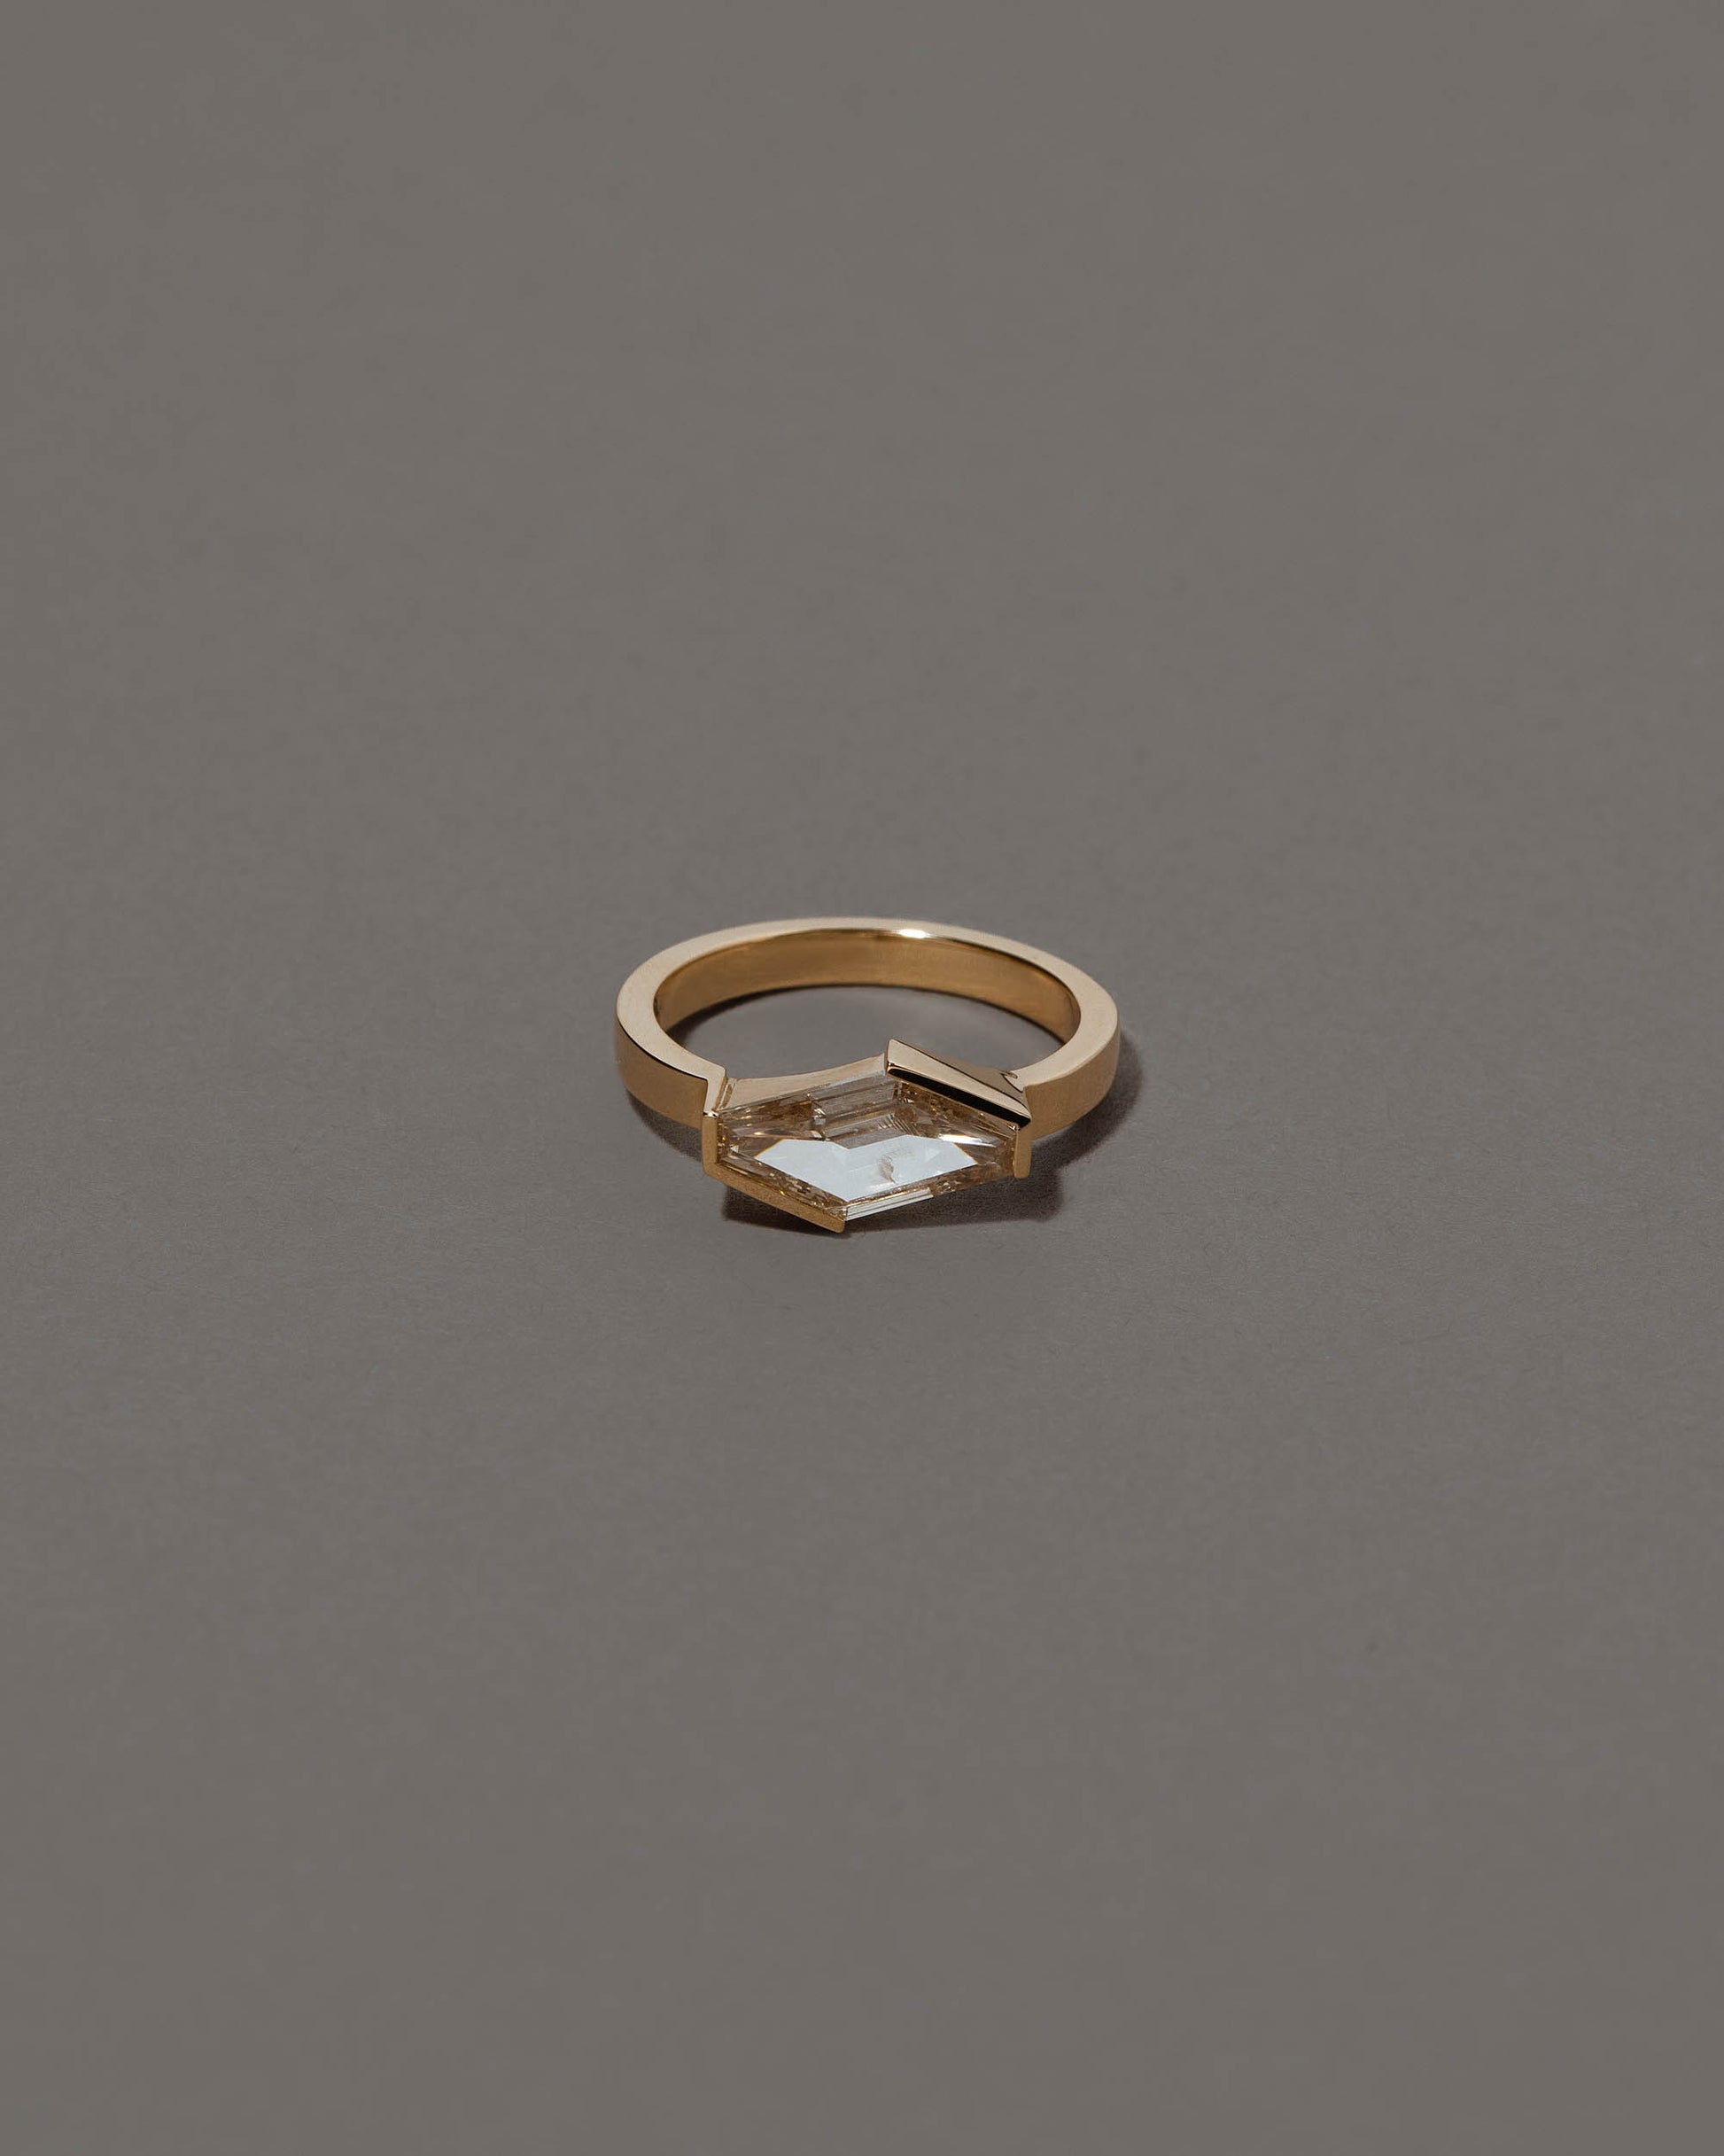 Mirth Ring on grey color background.